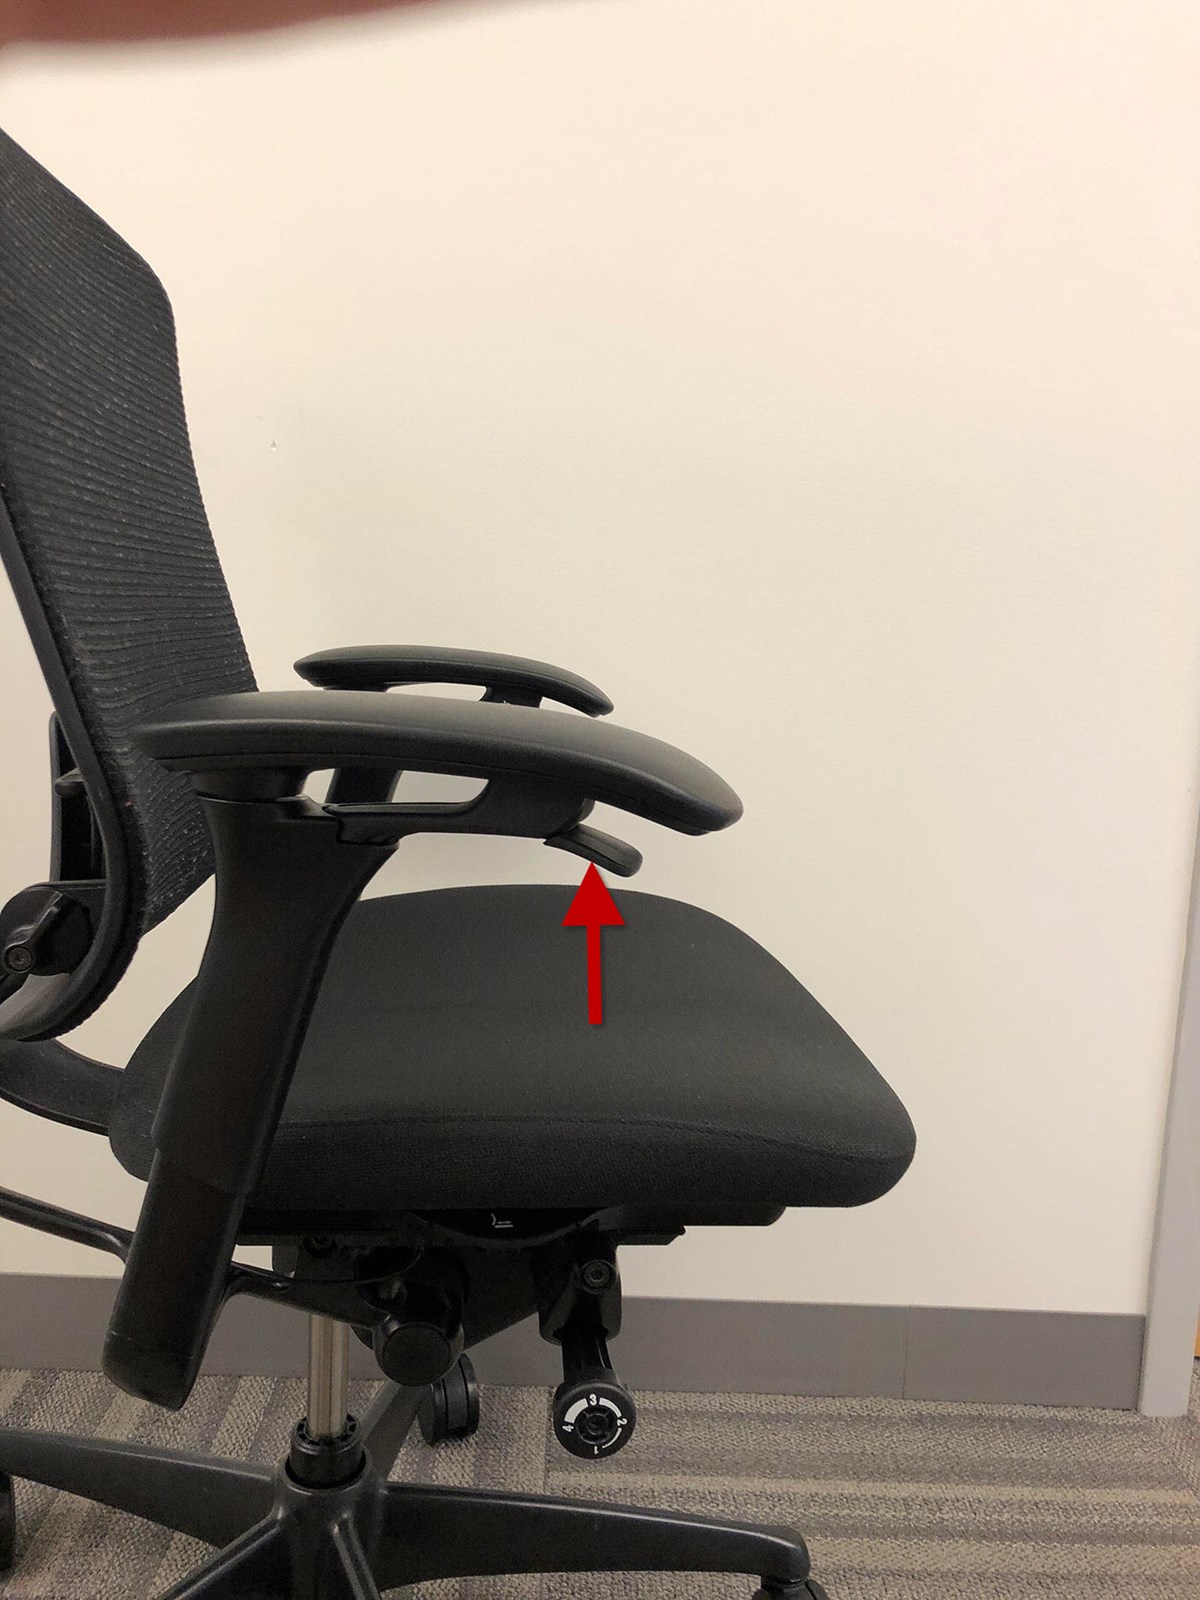 An empty contessa chair with an arrow pointing to the lever under the right armrest.